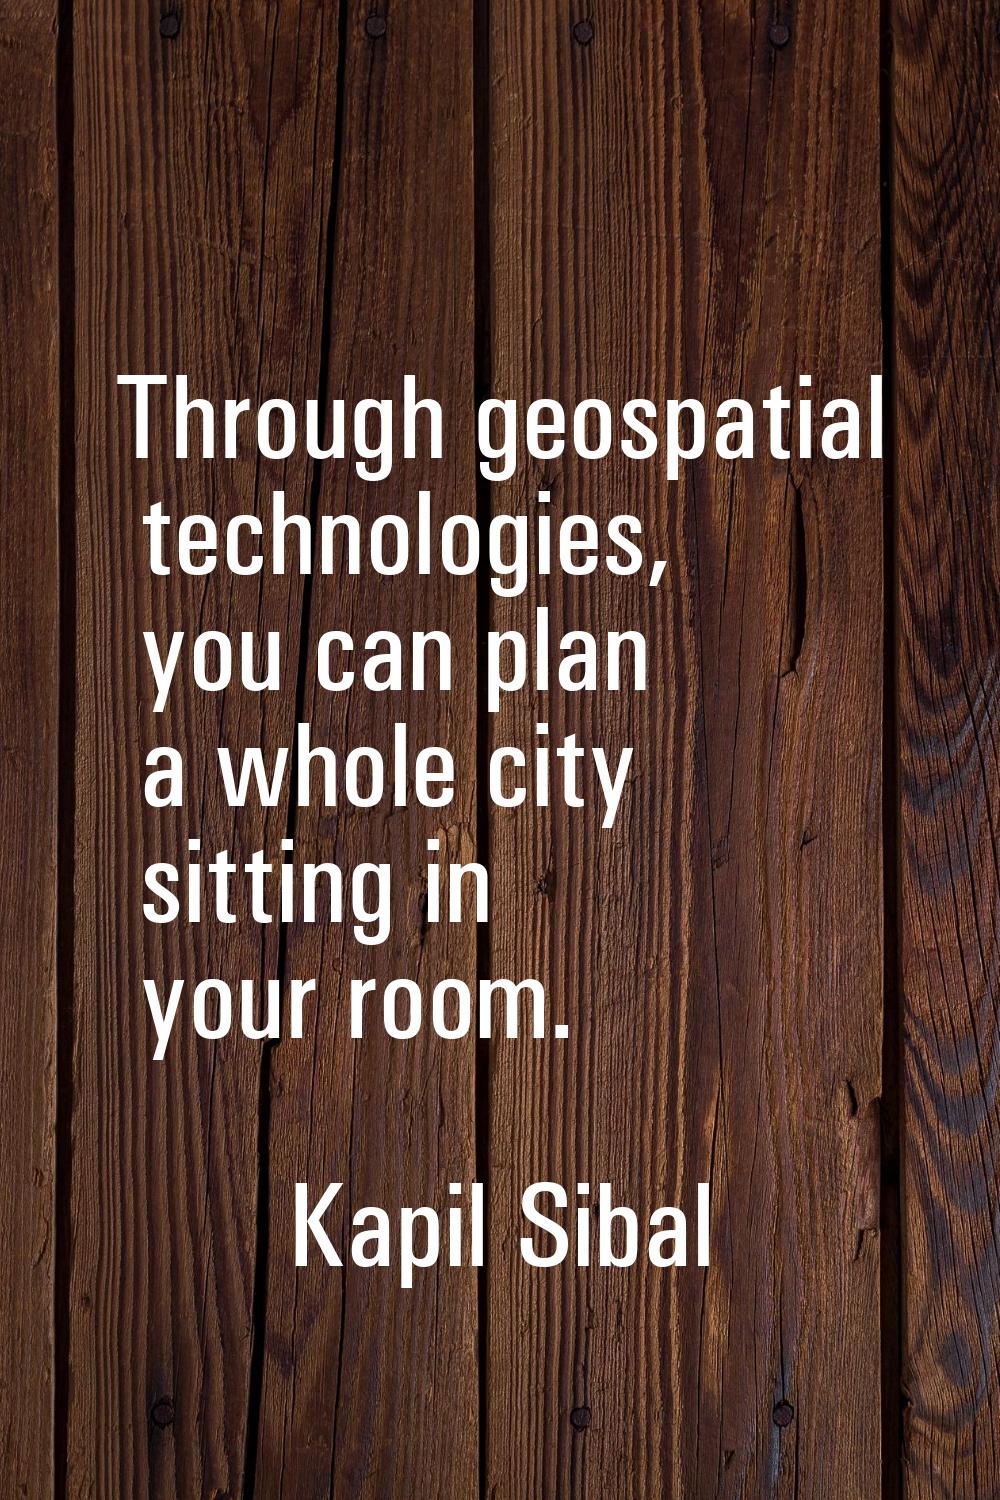 Through geospatial technologies, you can plan a whole city sitting in your room.